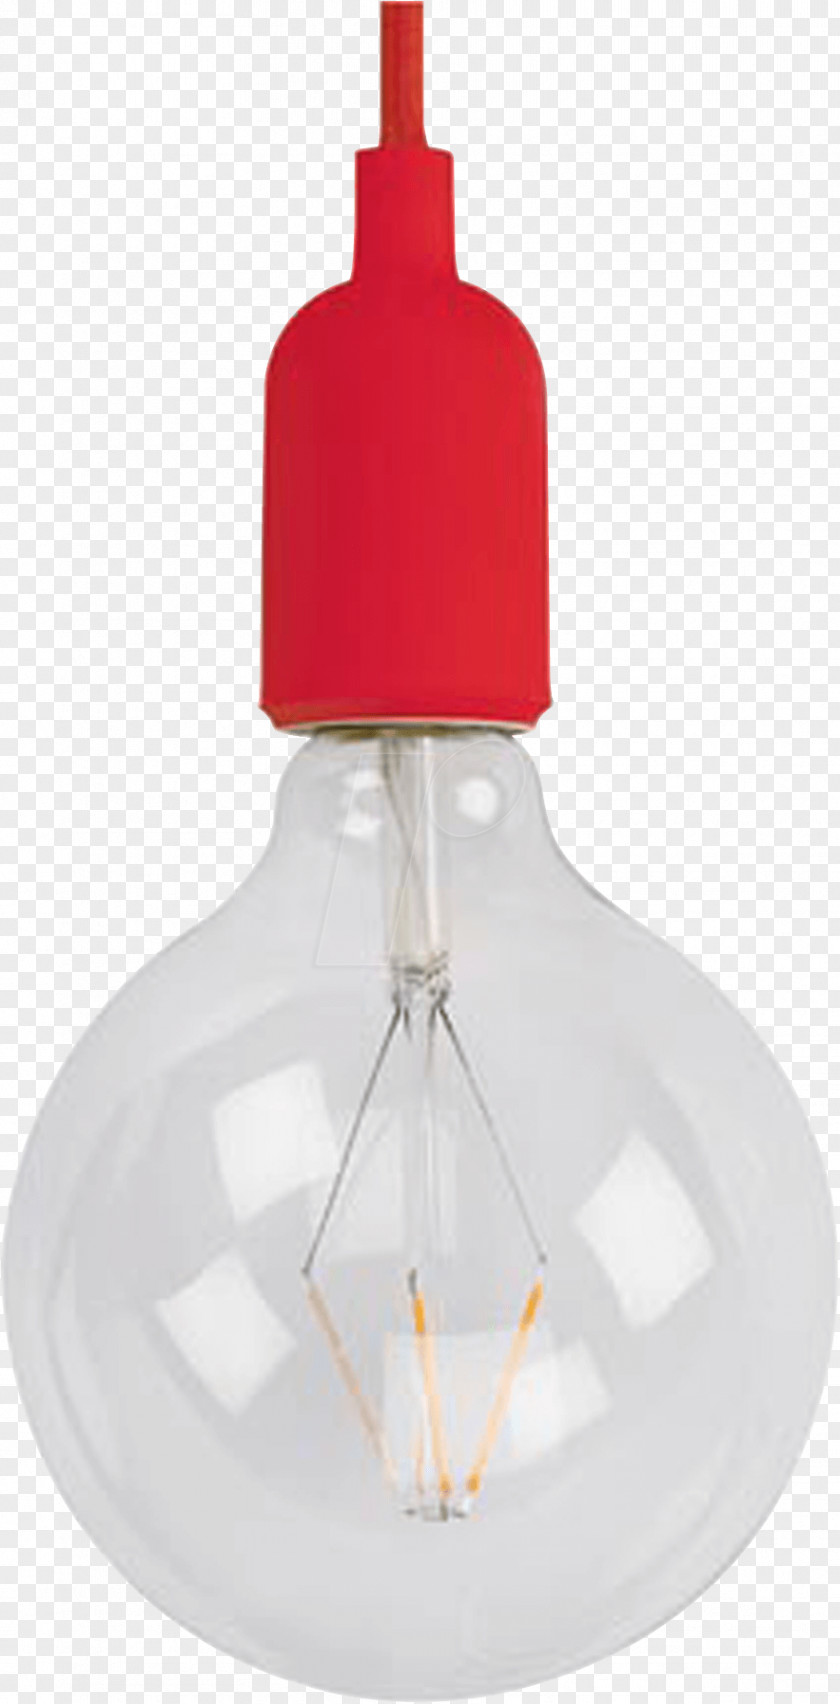 The Cord Fabric Lamp LED Filament Edison Screw Light-emitting Diode Electrical PNG